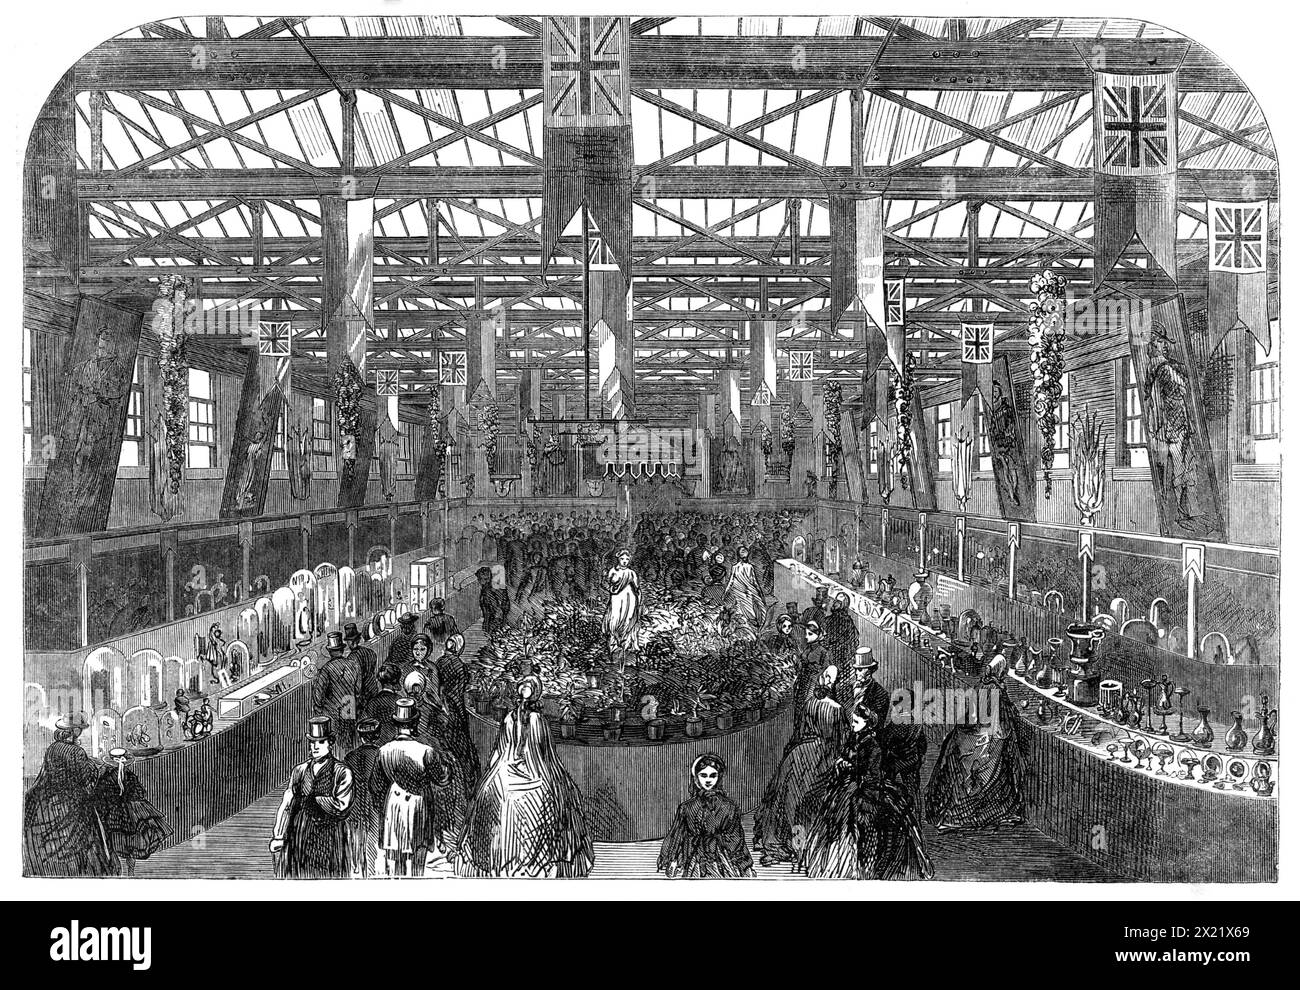 The Preston Exhibition of Works of Art and Industry, 1865. 'The Exhibition of Works of Art and Industry at Preston, Lancashire, which was...[held] in the Exchange Buildings, Lune-street, includes a picture-gallery, containing several valuable works of Landseer, Turner, Roberts, Frith, Hunt, and others, with a few pieces of sculpture; a collection of specimens of natural history, with scientific instruments and apparatus; mechanical models, machinery in motion; various manufactured products, chiefly of the textile fabrics; and a museum of antiquities and curiosities, mostly of local interest. T Stock Photo